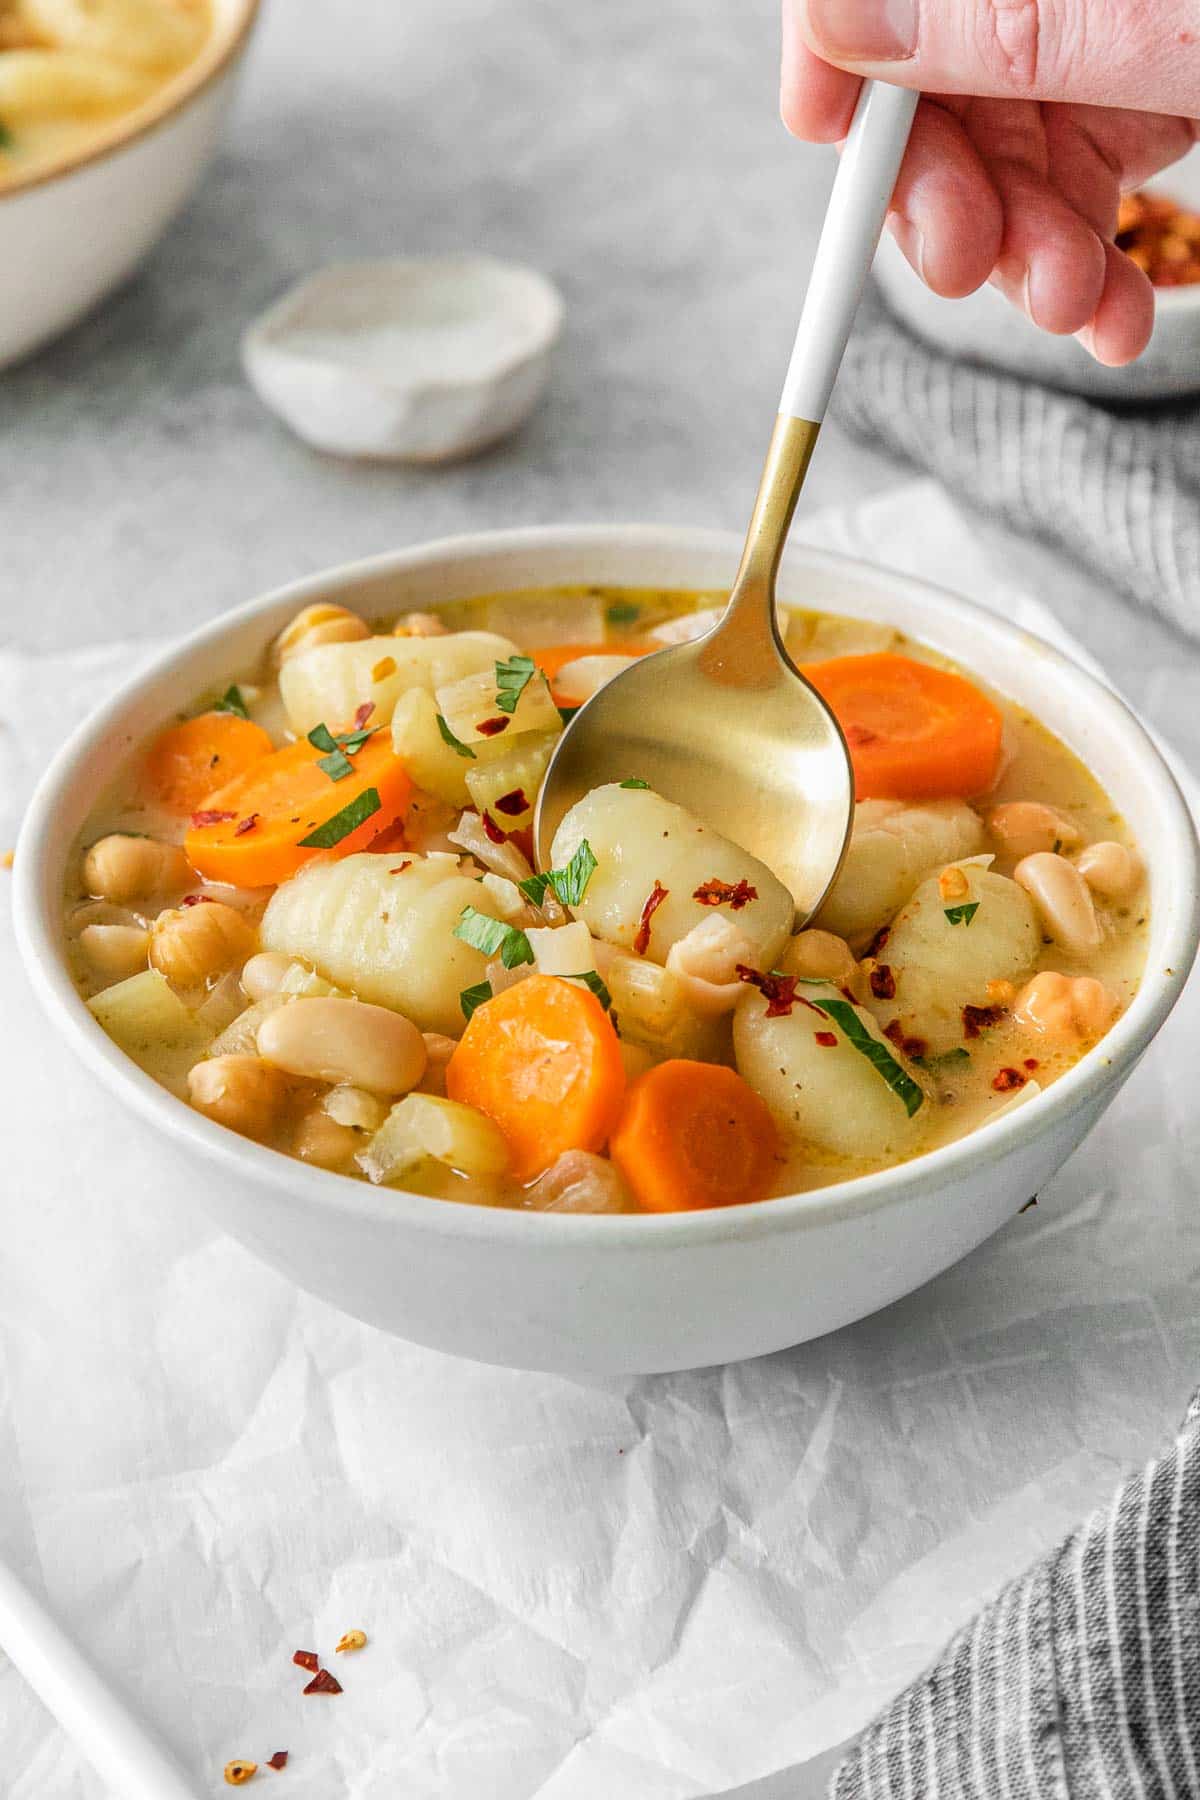 A person holding a spoonful of gnocchi soup with carrots and beans in a white bowl.